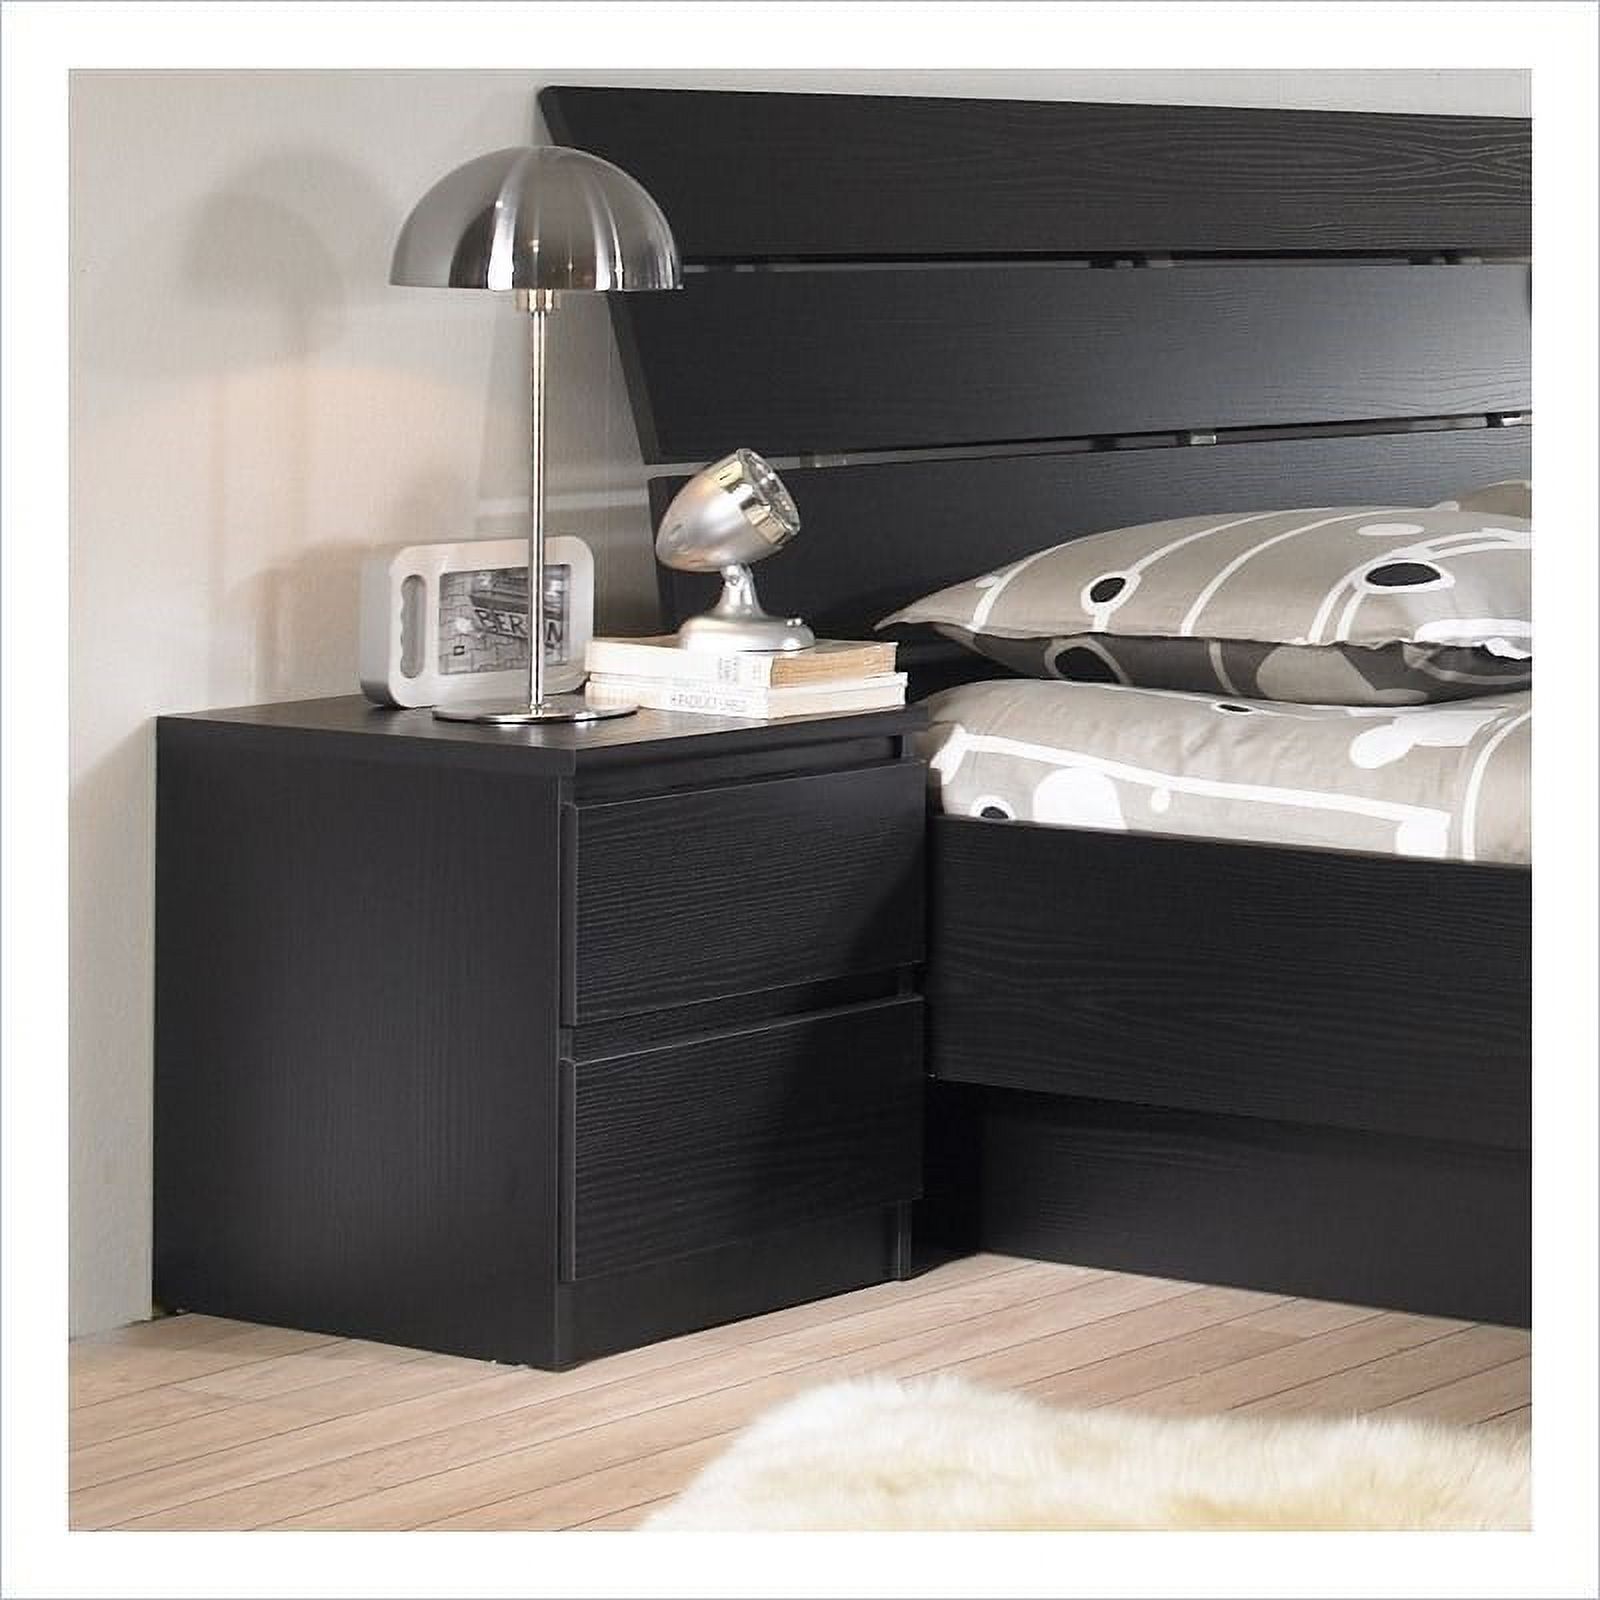 Home Square 2 Drawer Night Stands in Black Woodgrain (Set of 2) - image 2 of 4